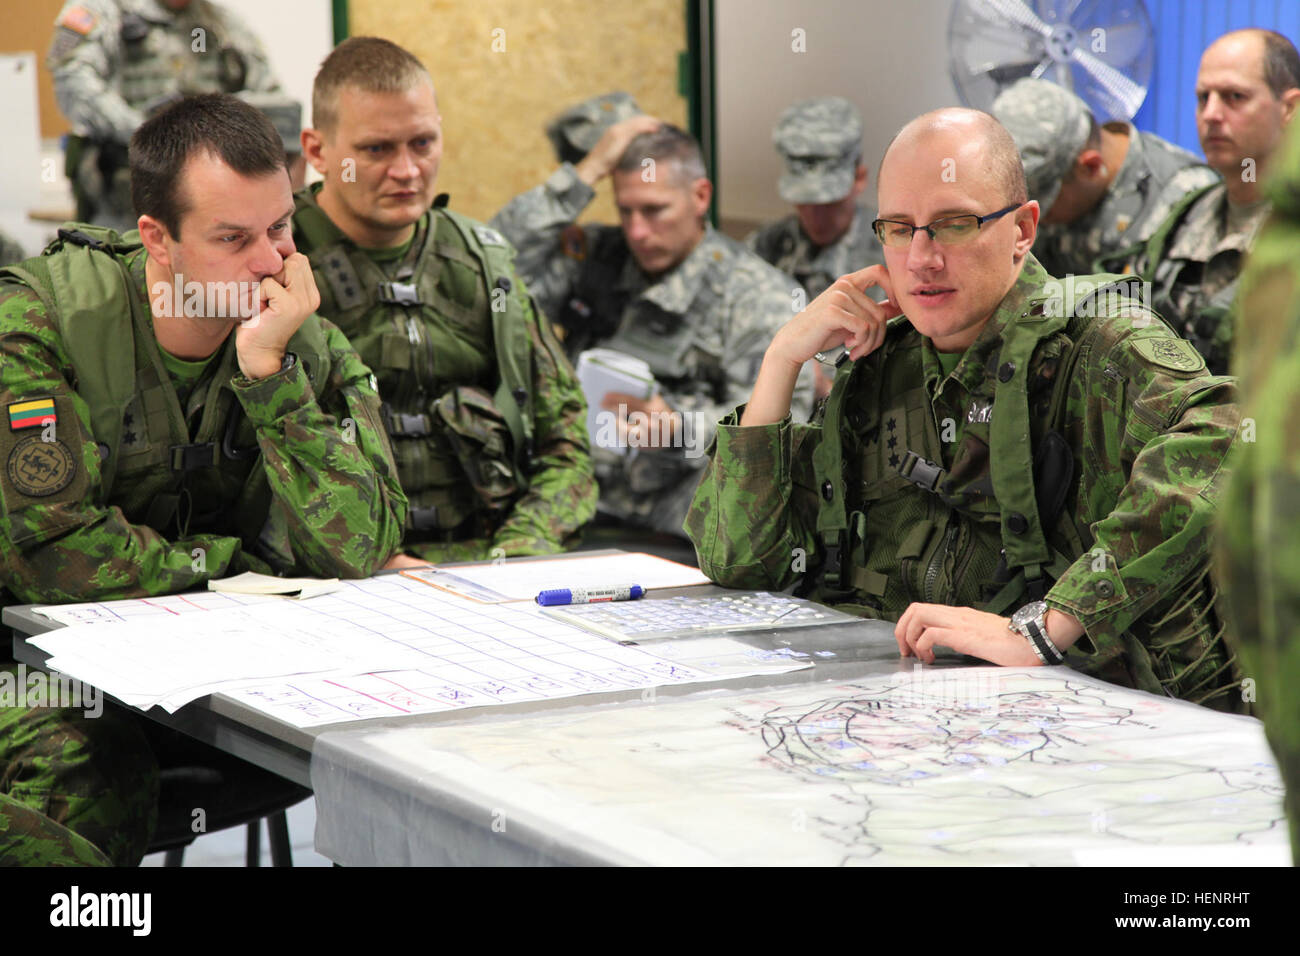 Lithuanian soldiers of "Iron Wolf" Mechanized Infantry Brigade study a map while working to plan a mission during training exercise Saber Junction 2014 at the Joint Multinational Readiness Center in Hohenfels, Germany, Sept. 6, 2014. Saber Junction 2014 prepares U.S., NATO allies and European security partners to conduct unified land operations through the simultaneous combination of offensive, defensive and stability operations appropriate to the mission and the environment.  More information about Saber Junction 2014 can be found at http://www.eur.army.mil/SaberJunction/ (U.S. Army photo by  Stock Photo